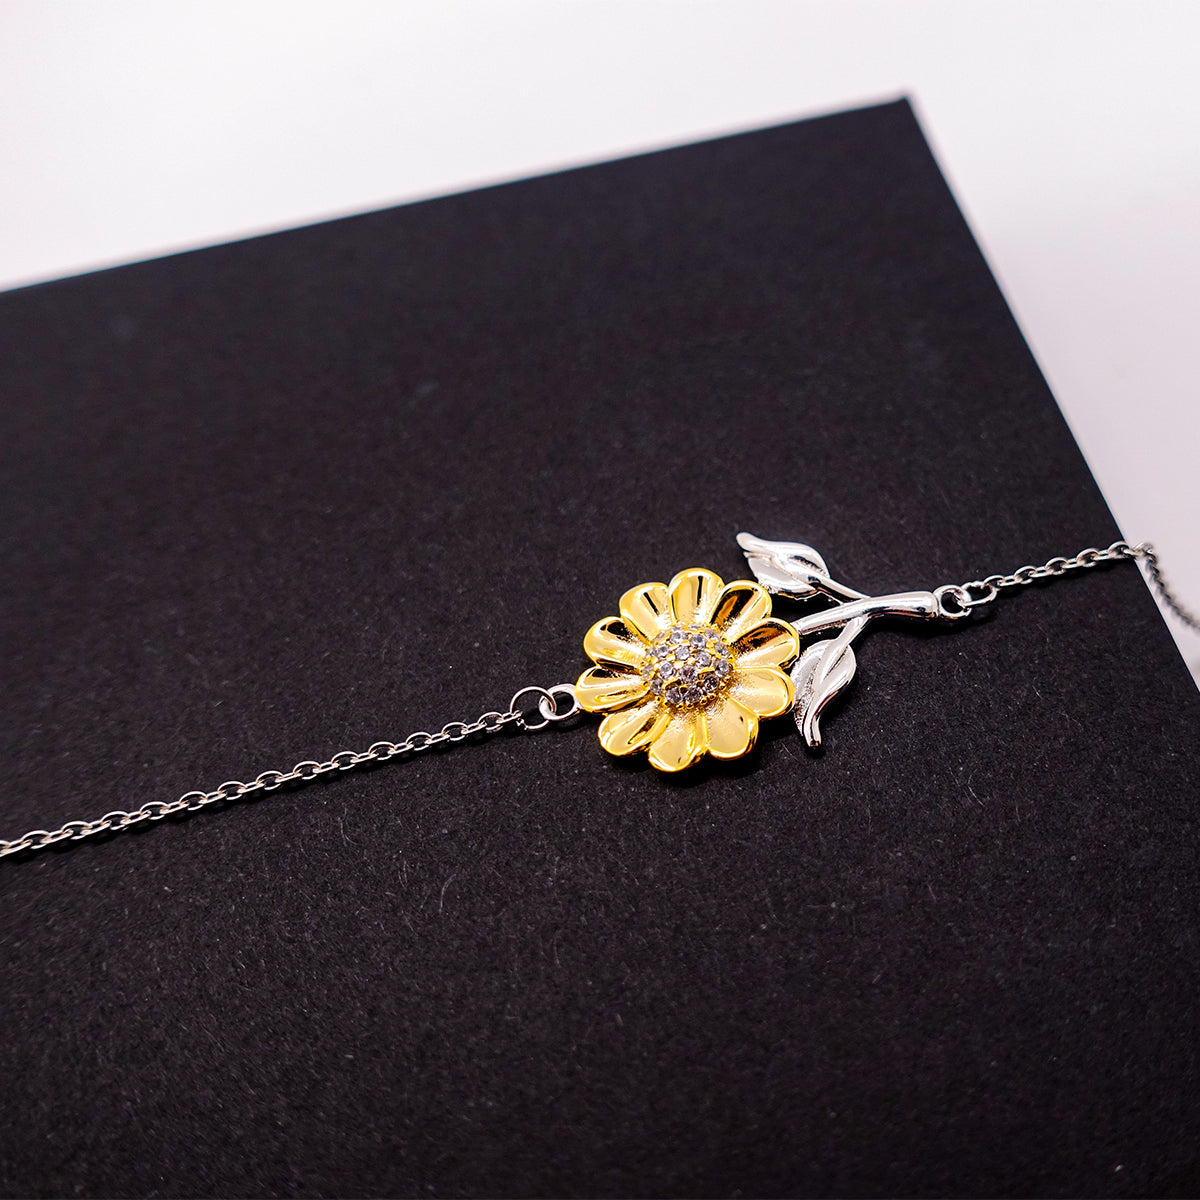 Graduation Gifts for Niece Sunflower Bracelet Present from Uncle, Christmas Niece Birthday Gifts Niece You are precious in every way the sunshine in my day. Love, Uncle